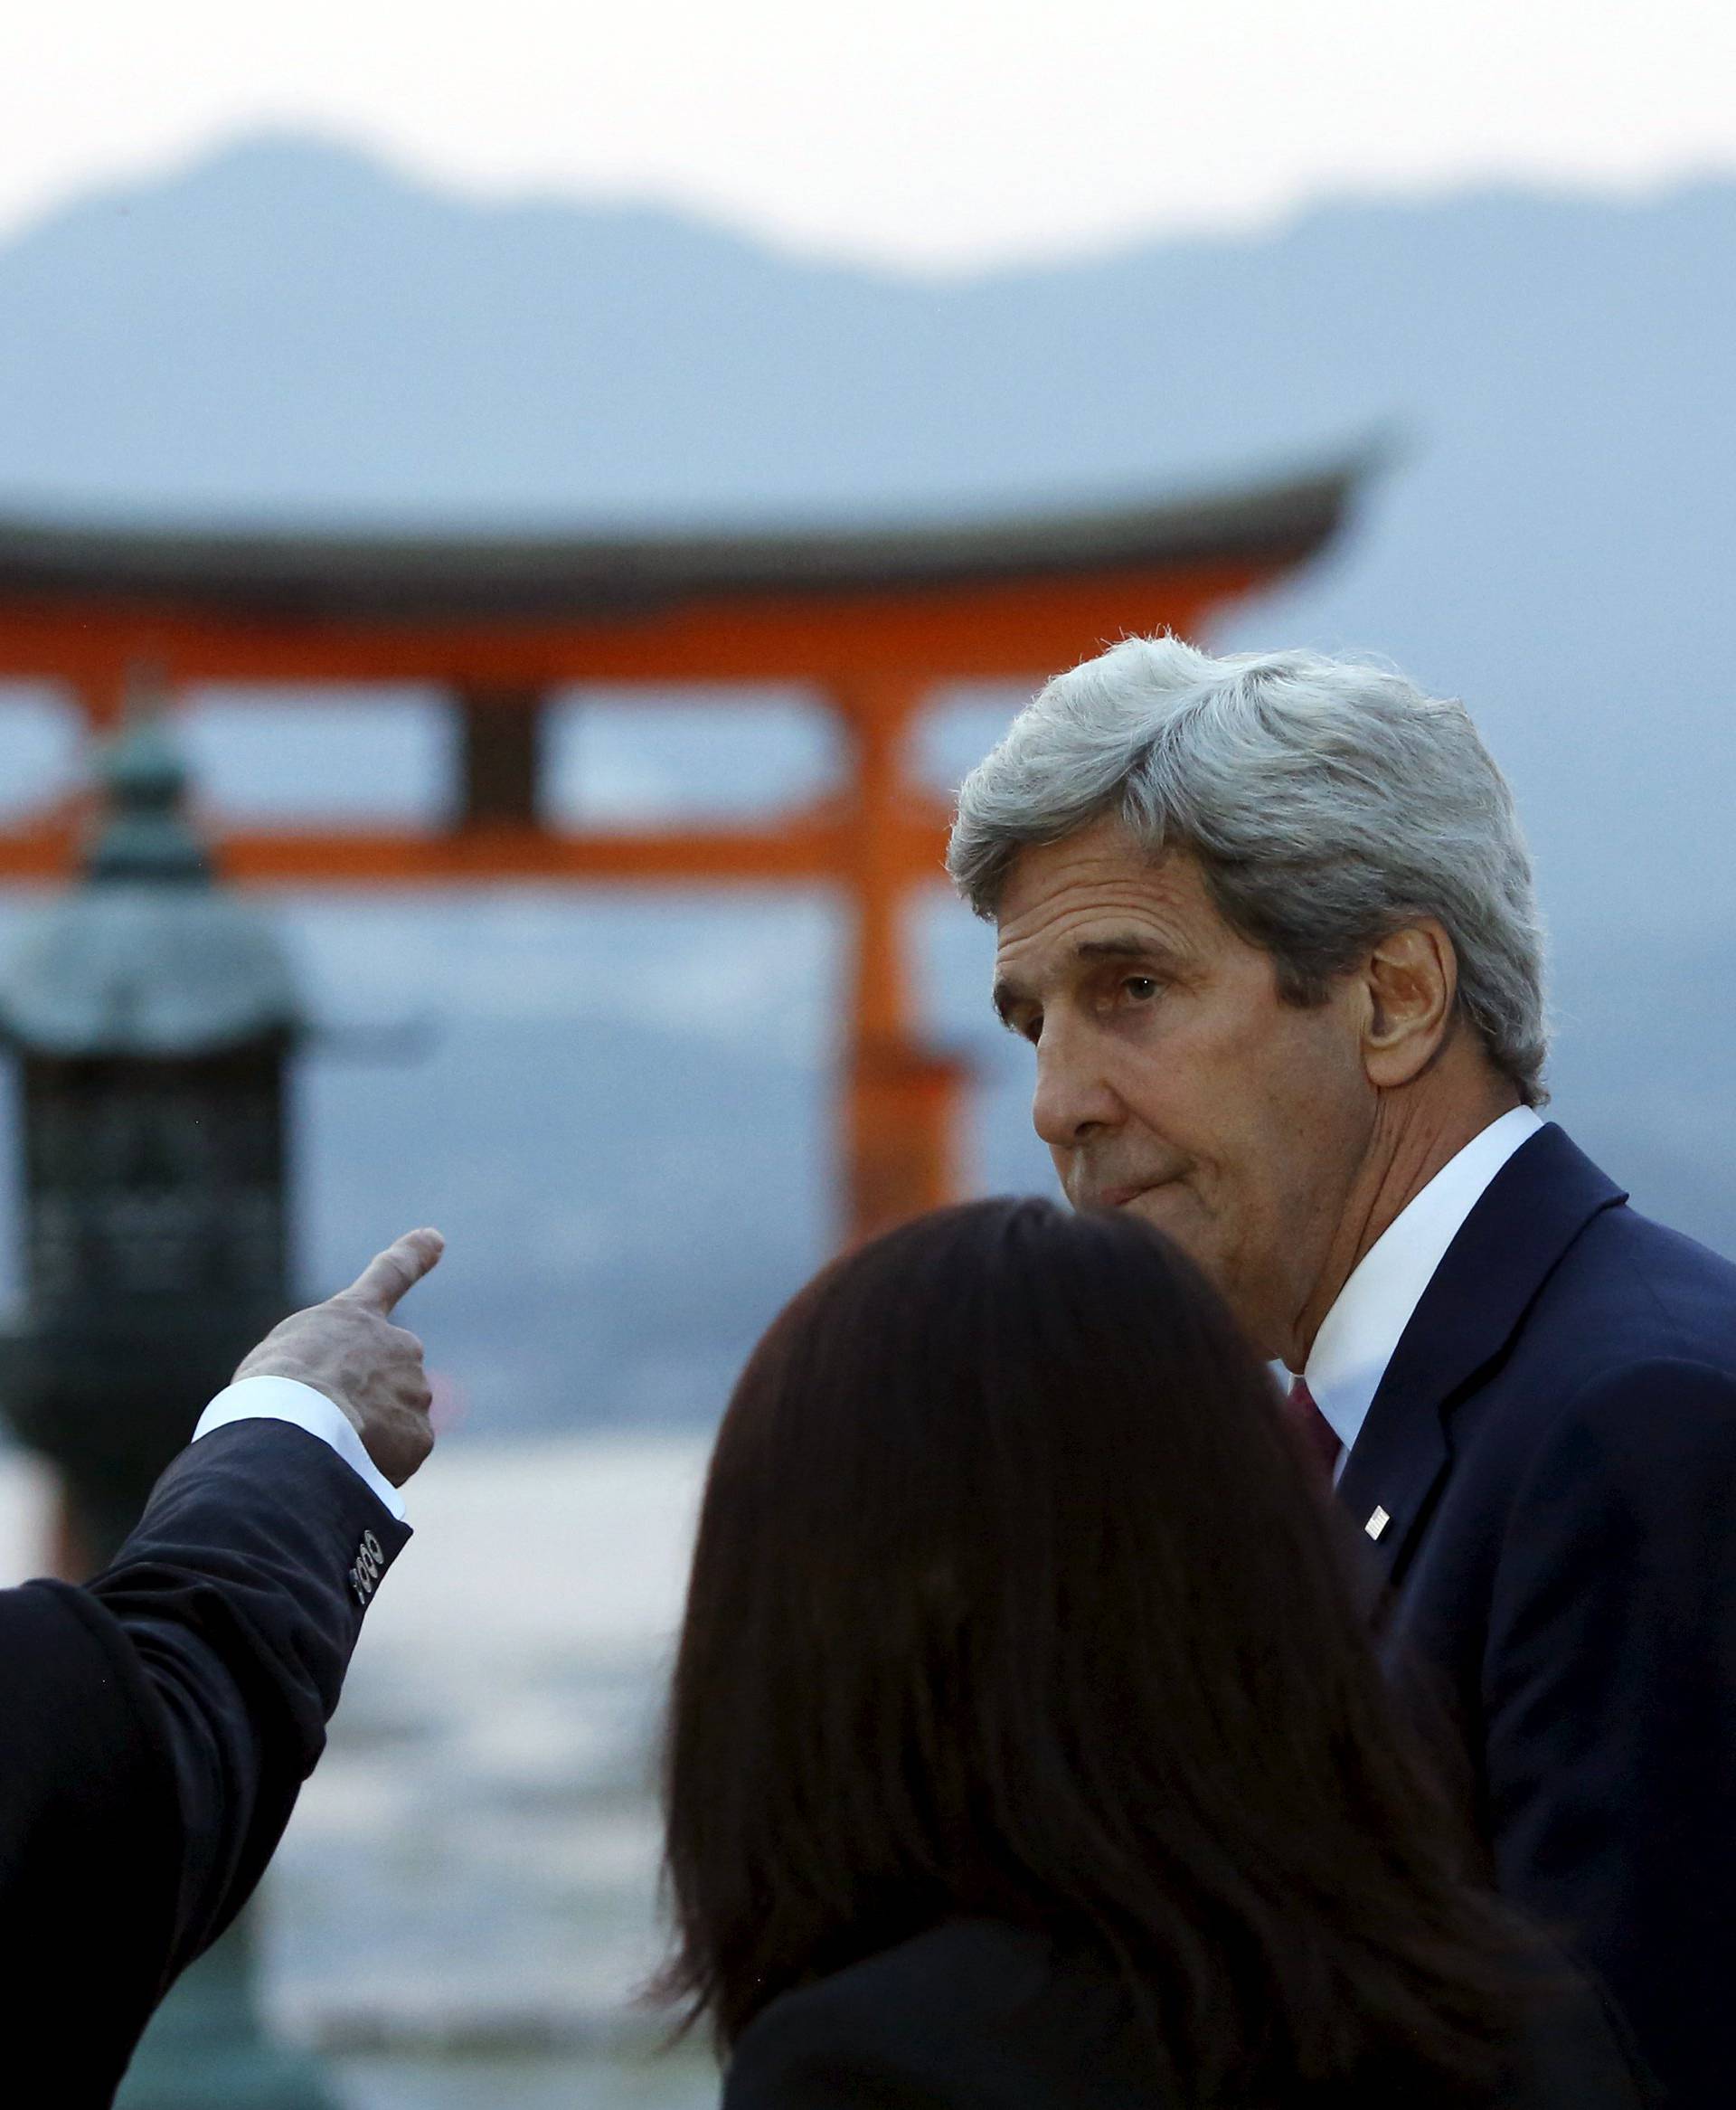 Kerry listens to Kishida as they and G7 foreign ministers visit the Itsukushima Shrine as they take a cultural break from their meetings in nearby Hiroshima to visit Miyajima Island